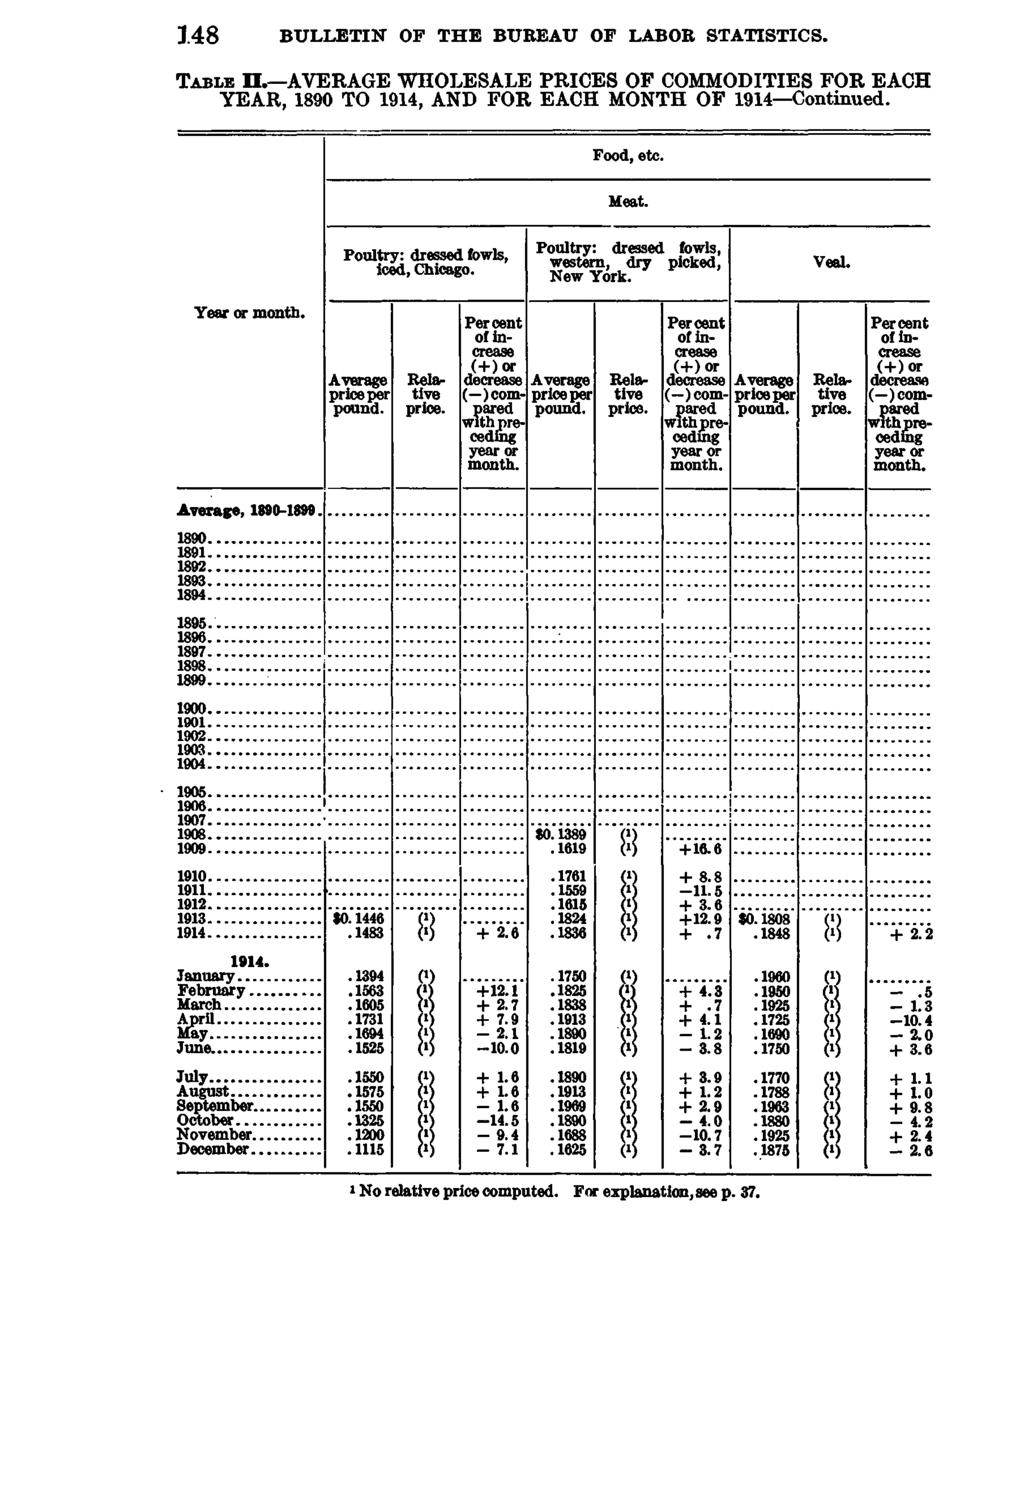 148 BULLETIN OP THE BUBEAU OP LABOB STATISTICS. T a b l e I L AVERAGE WHOLESALE PRICES OF COMMODITIES FOR EACH YEAR, 1890 TO 1914, AND FOR EACH MONTH OF 1914 Continued. Food, etc. Meat.